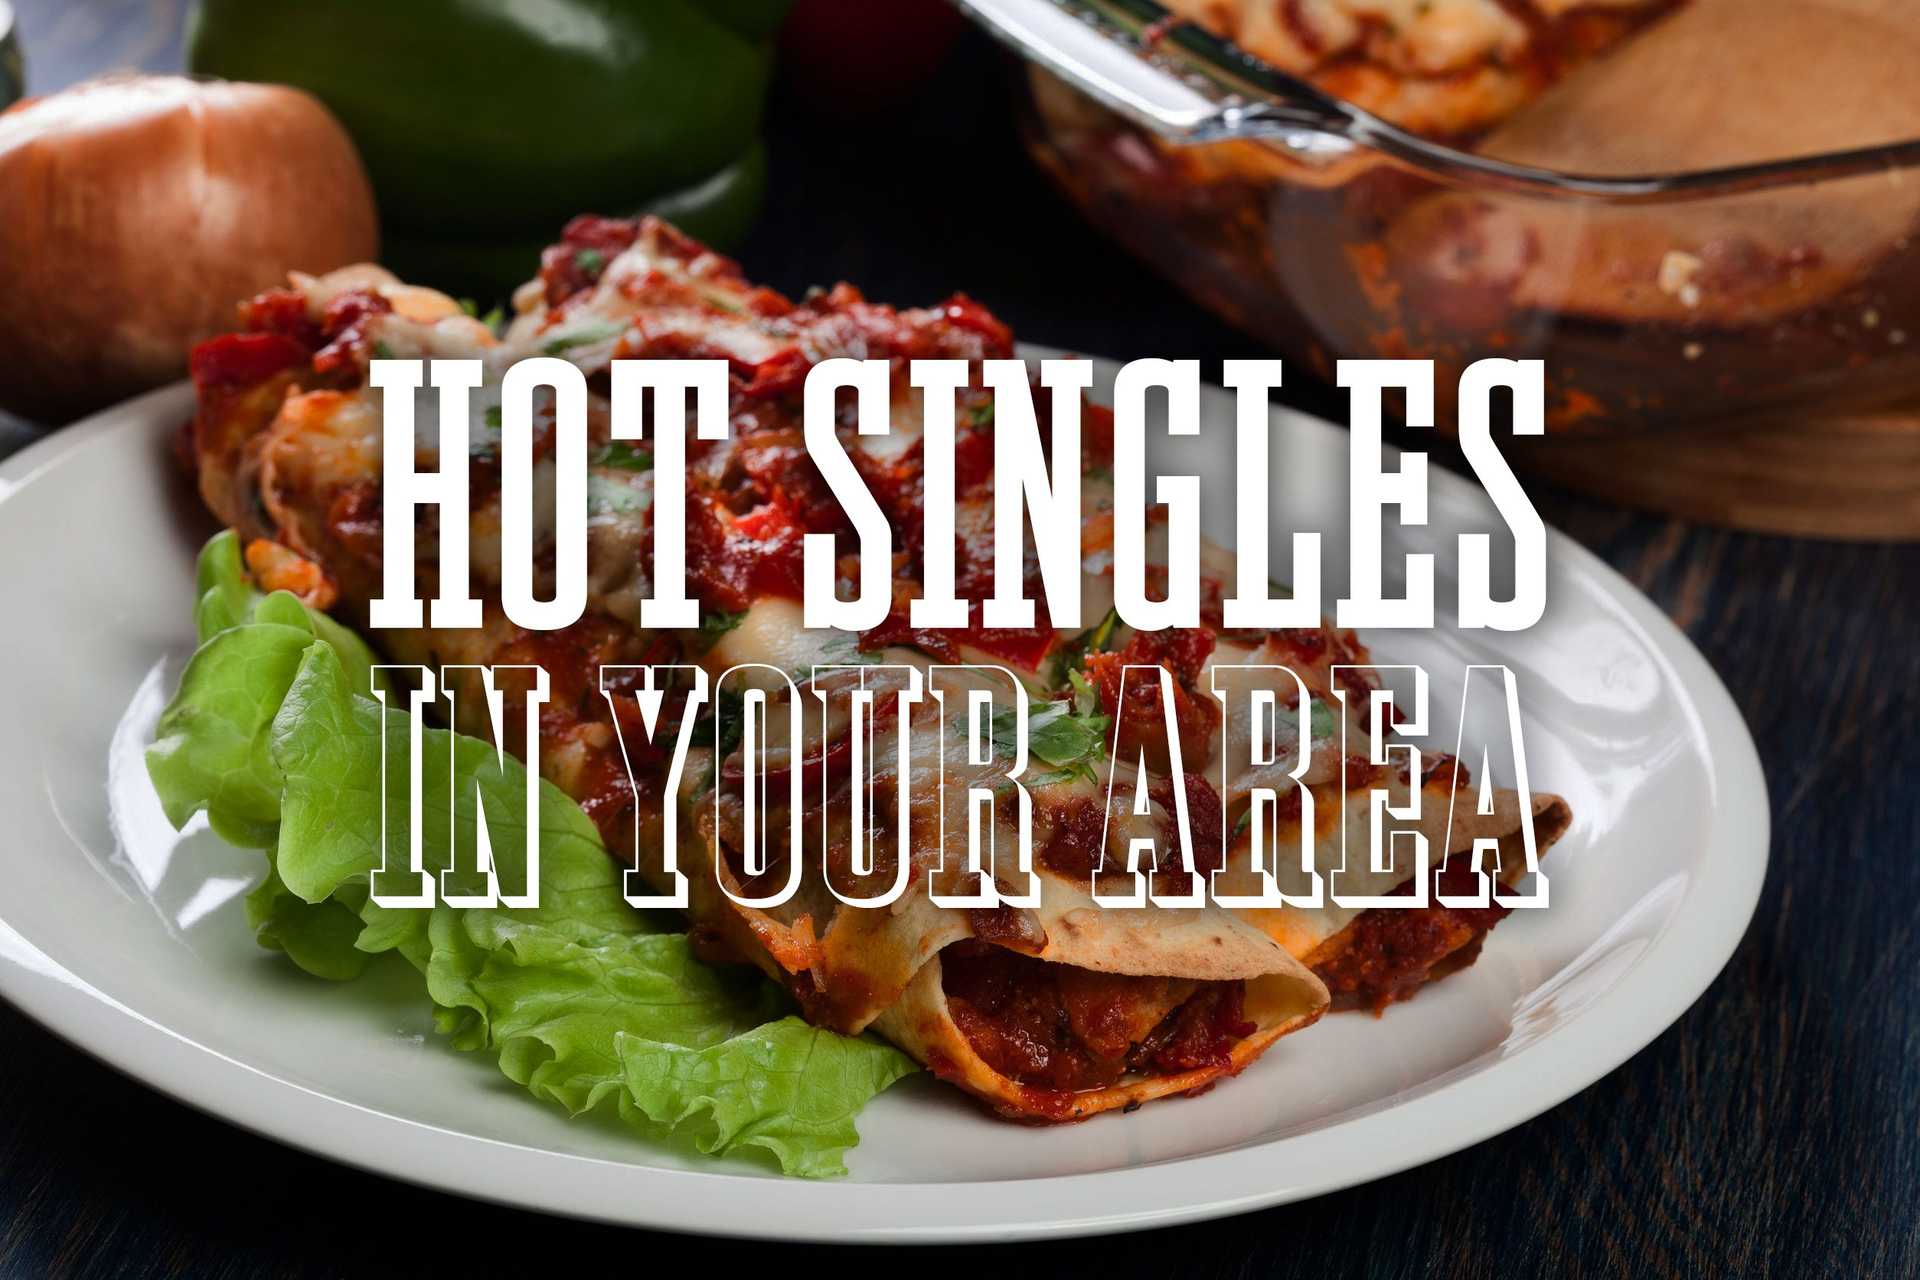 Hot Mexican Singles Near You